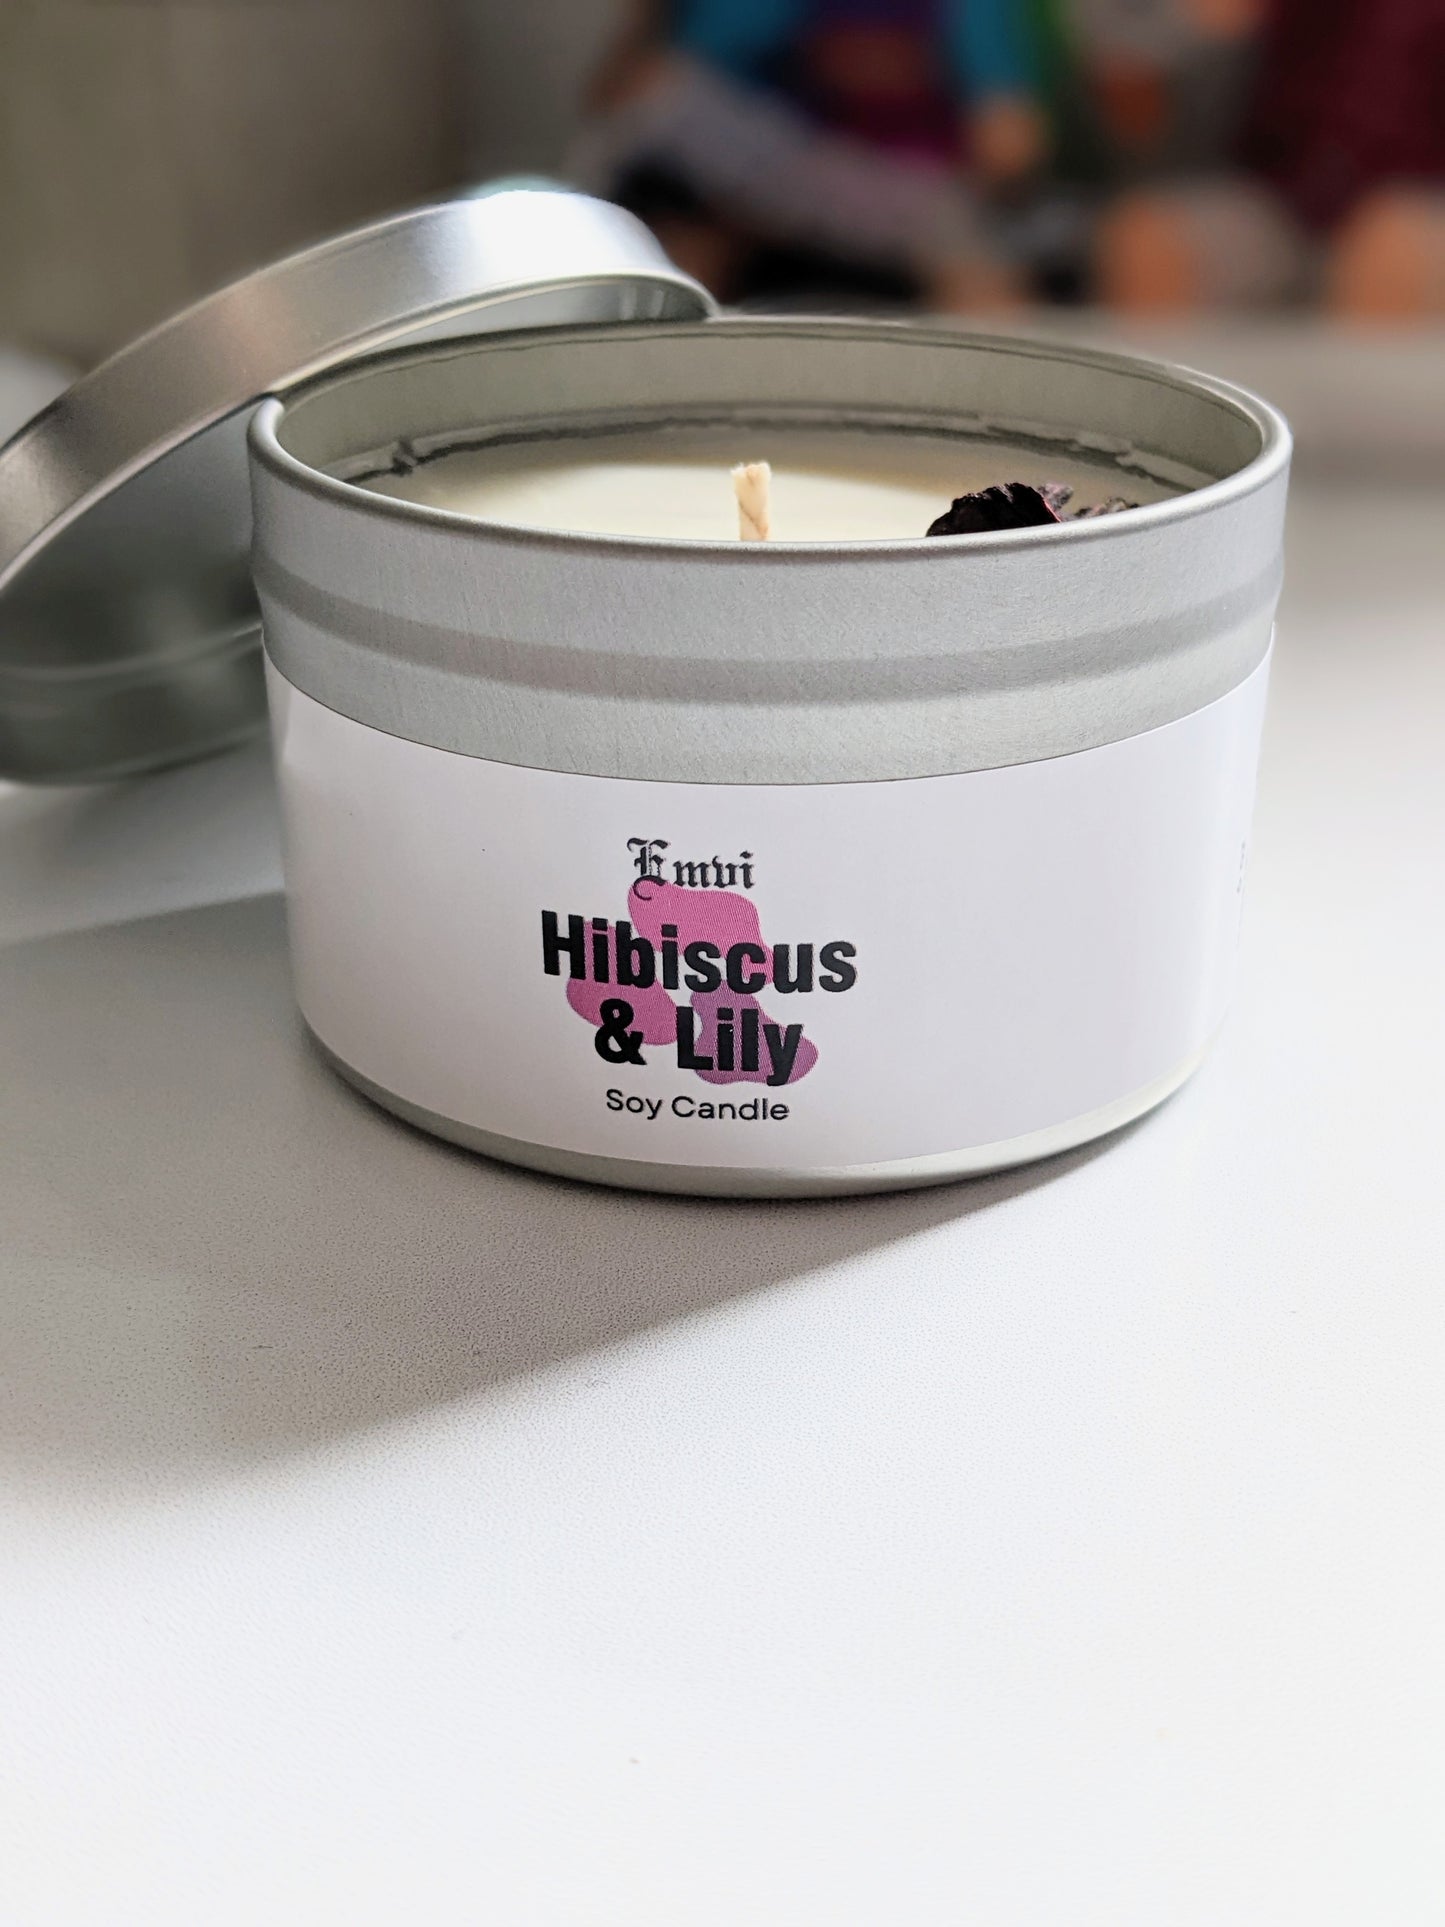 Hibiscus & Lily Soy Candle